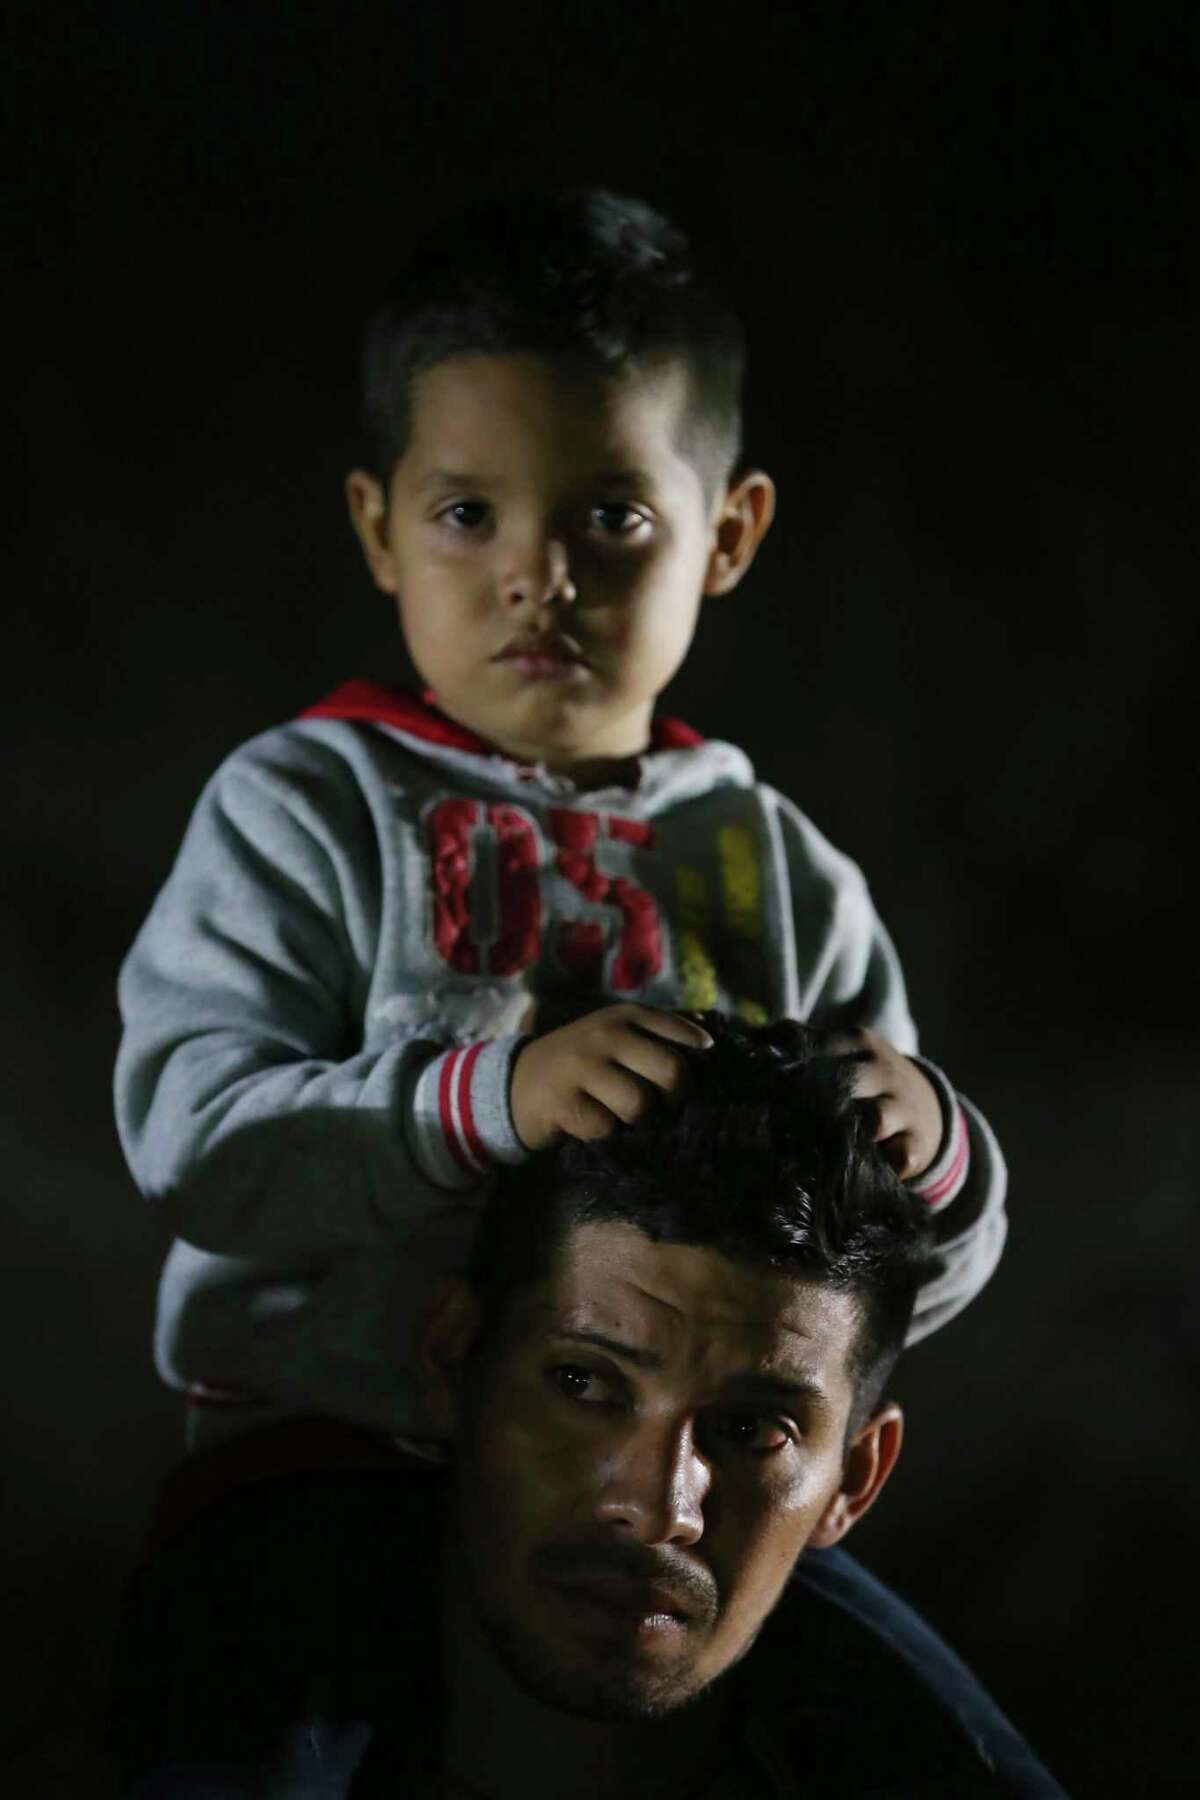 A migrant carries a child after crossing the Rio Grande into the U.S. at a placed called Rincon del Diablo, Devil’s Corner, in Hidalgo County, Texas, Wednesday, Feb. 24, 2021. Over two hundred crossed a in short time at the spot where families turn themselves into immigration authorities.